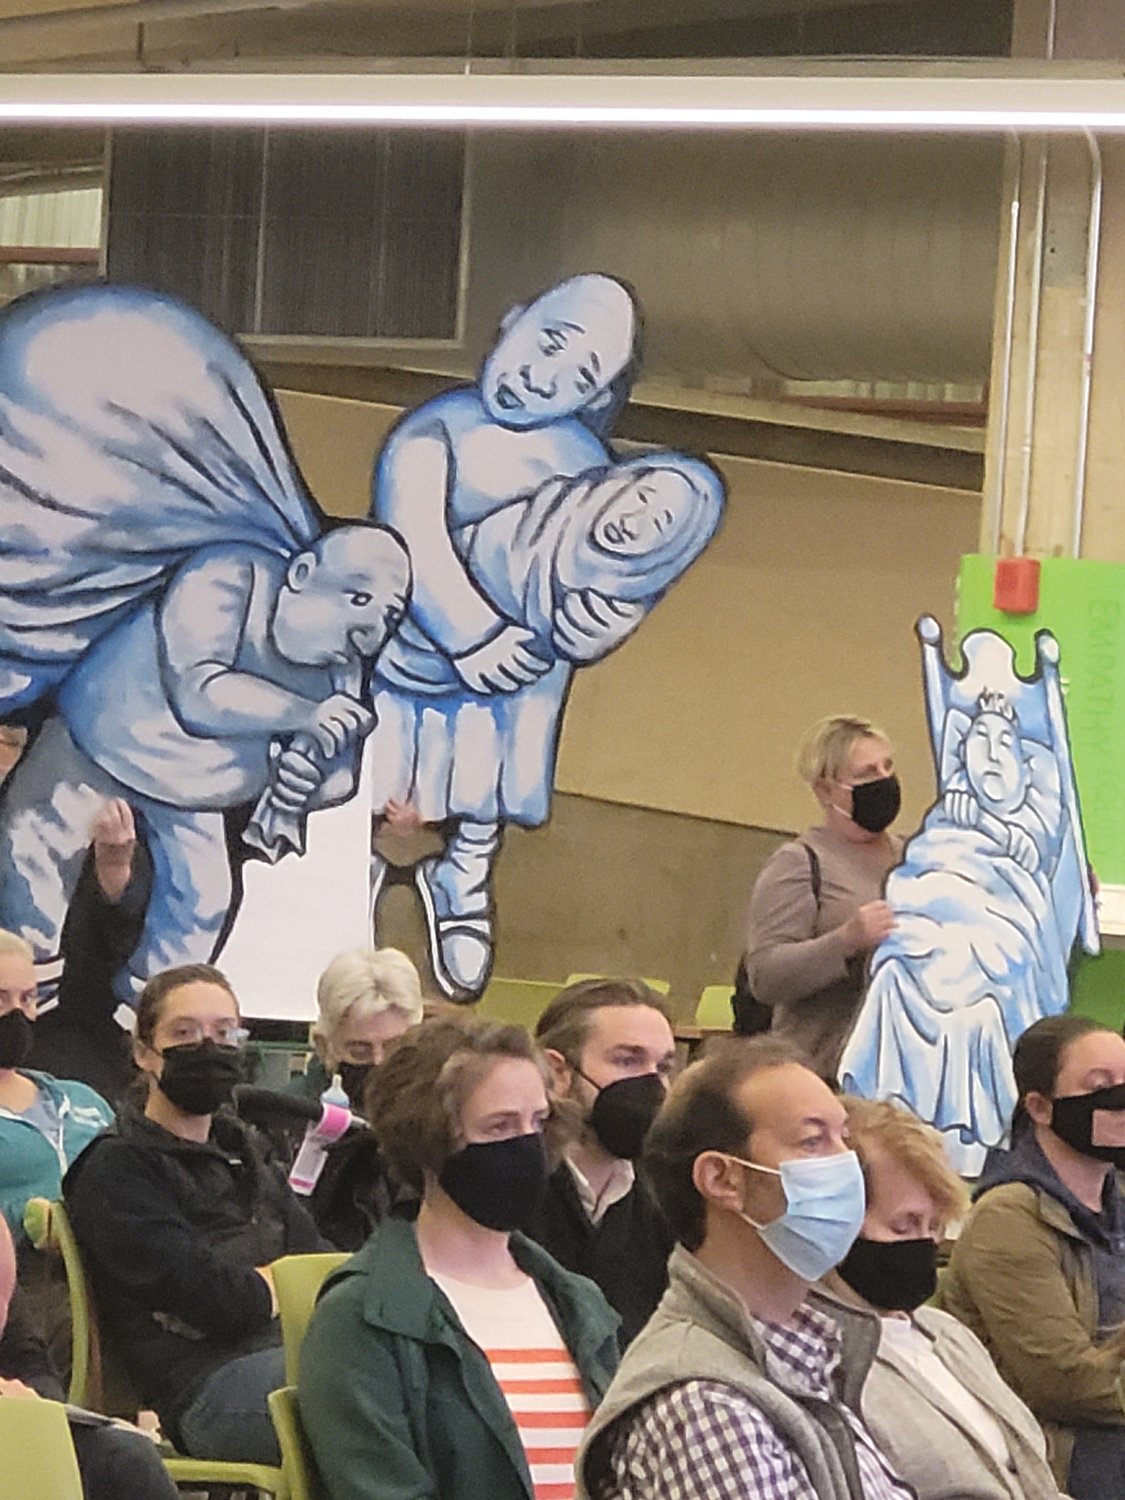 GIMME SHELTER: Members of the Rhode Island Homeless Advocacy Project carried life-size cutouts representing “unsheltered” Ocean State residents, during a RI 2030 public forum Tuesday night. 